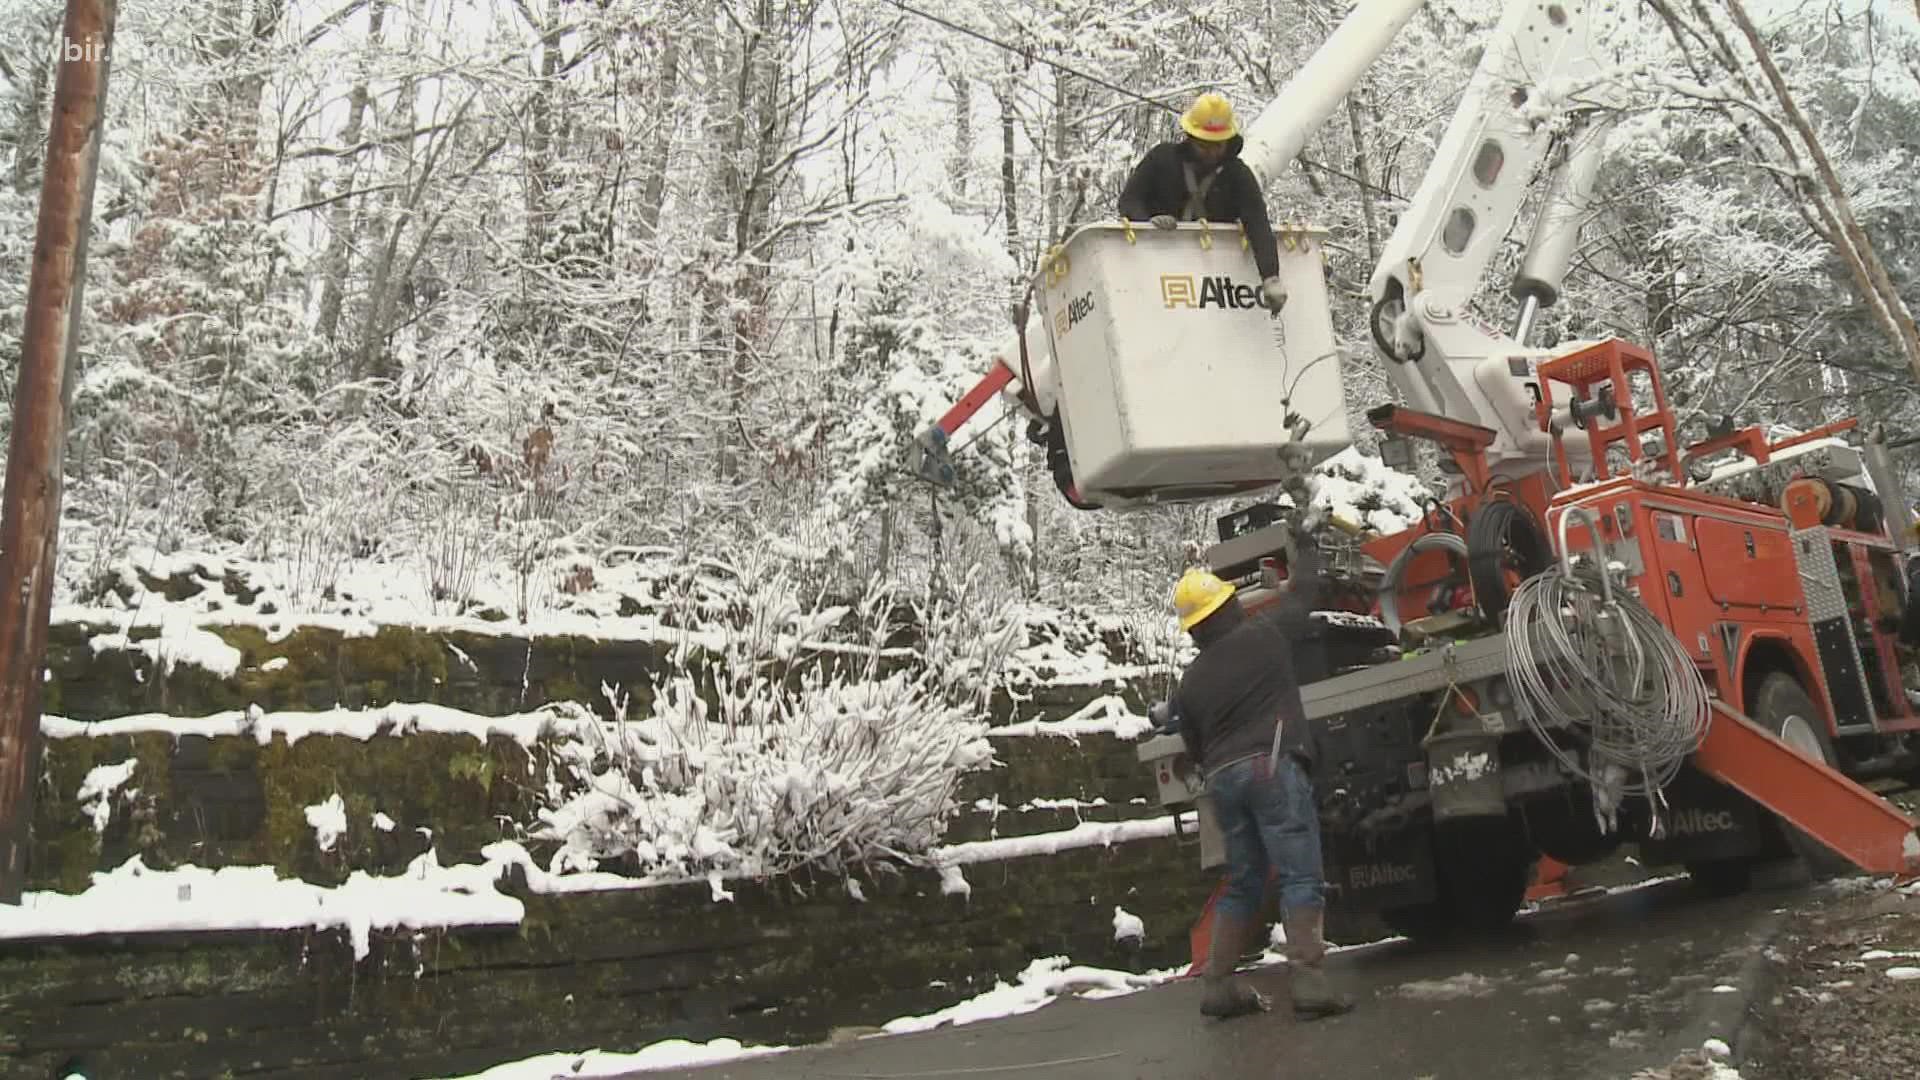 As temperatures fall below freezing, some people in Sevier County said they are having trouble finding generators to help them stay warm.